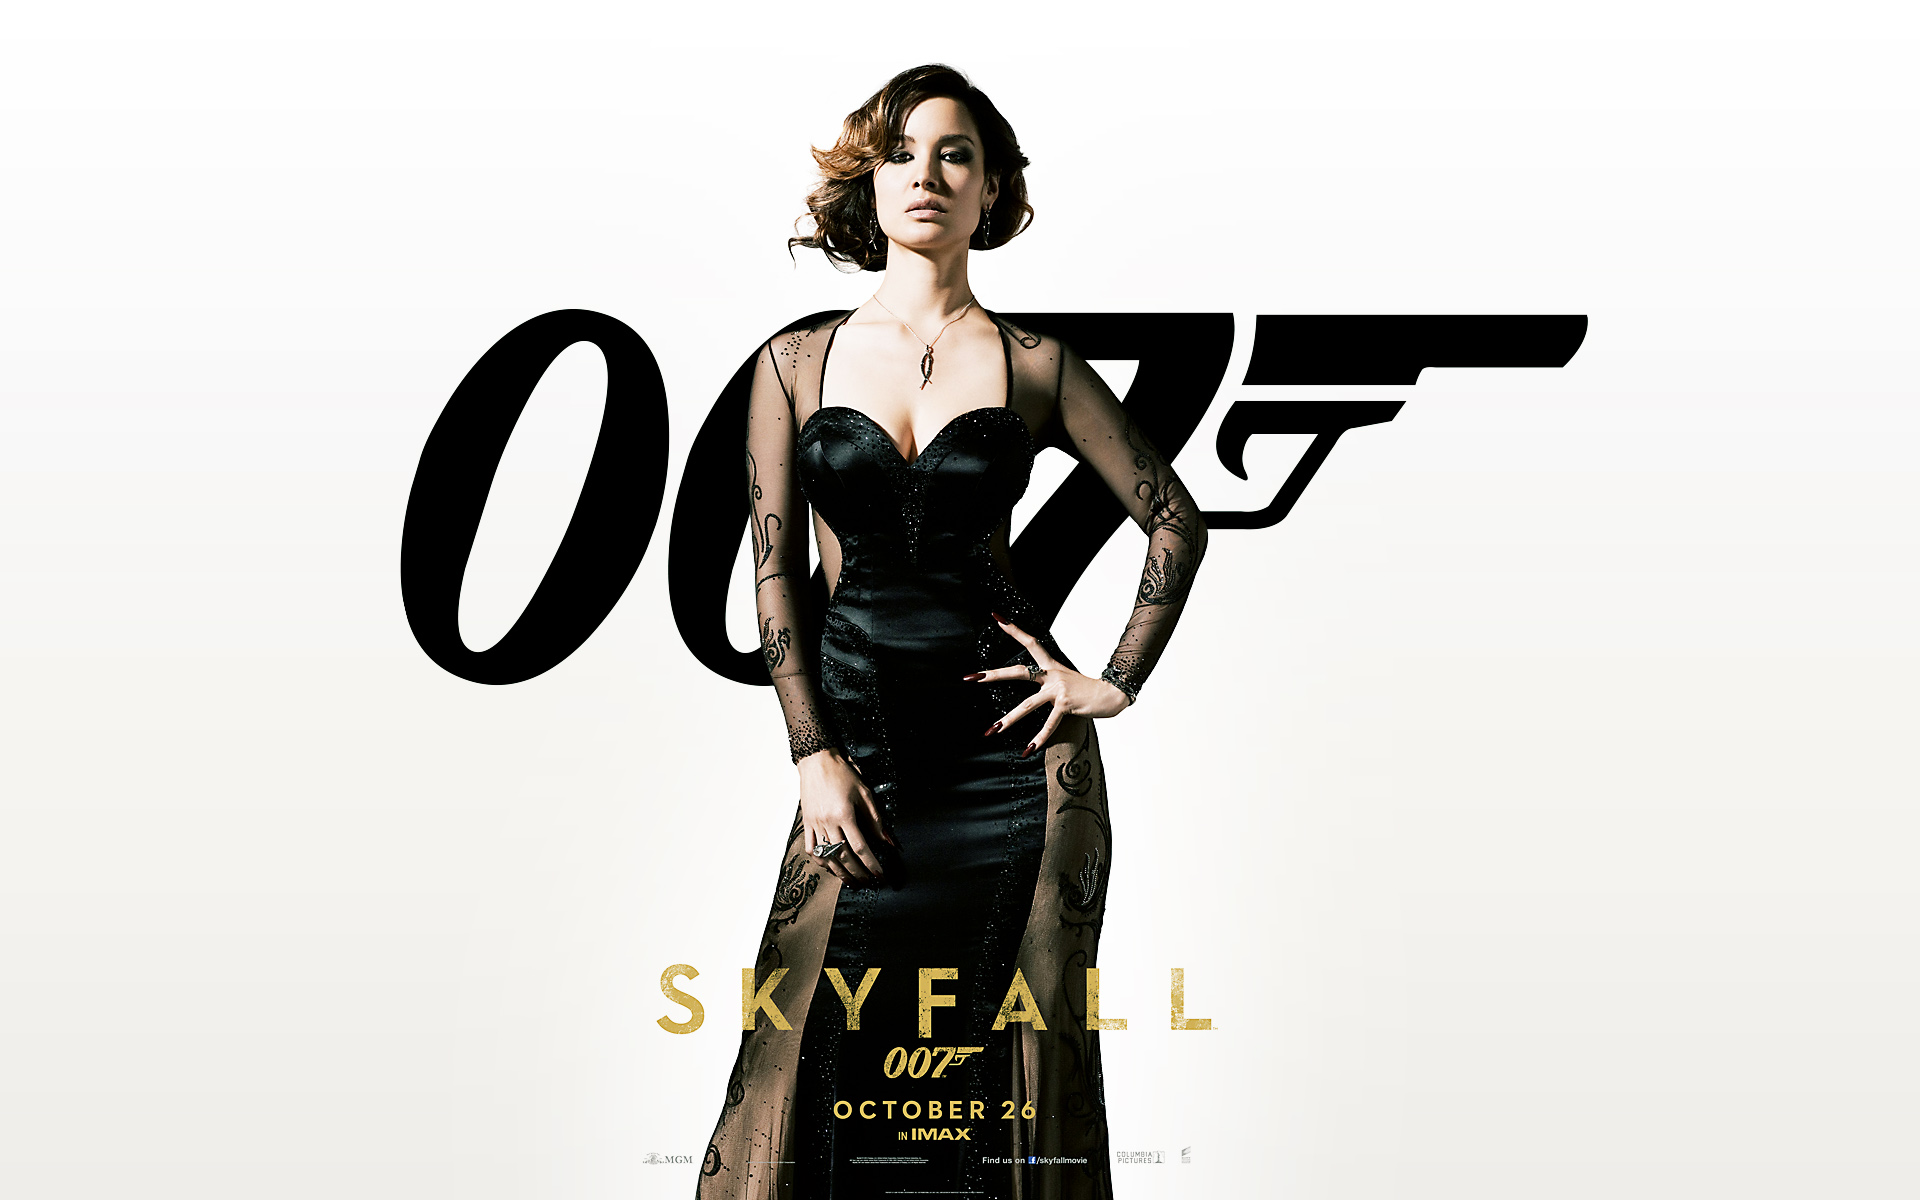 Skyfall 4k Wallpapers For Your Desktop Or Mobile Screen Free And Easy To Download